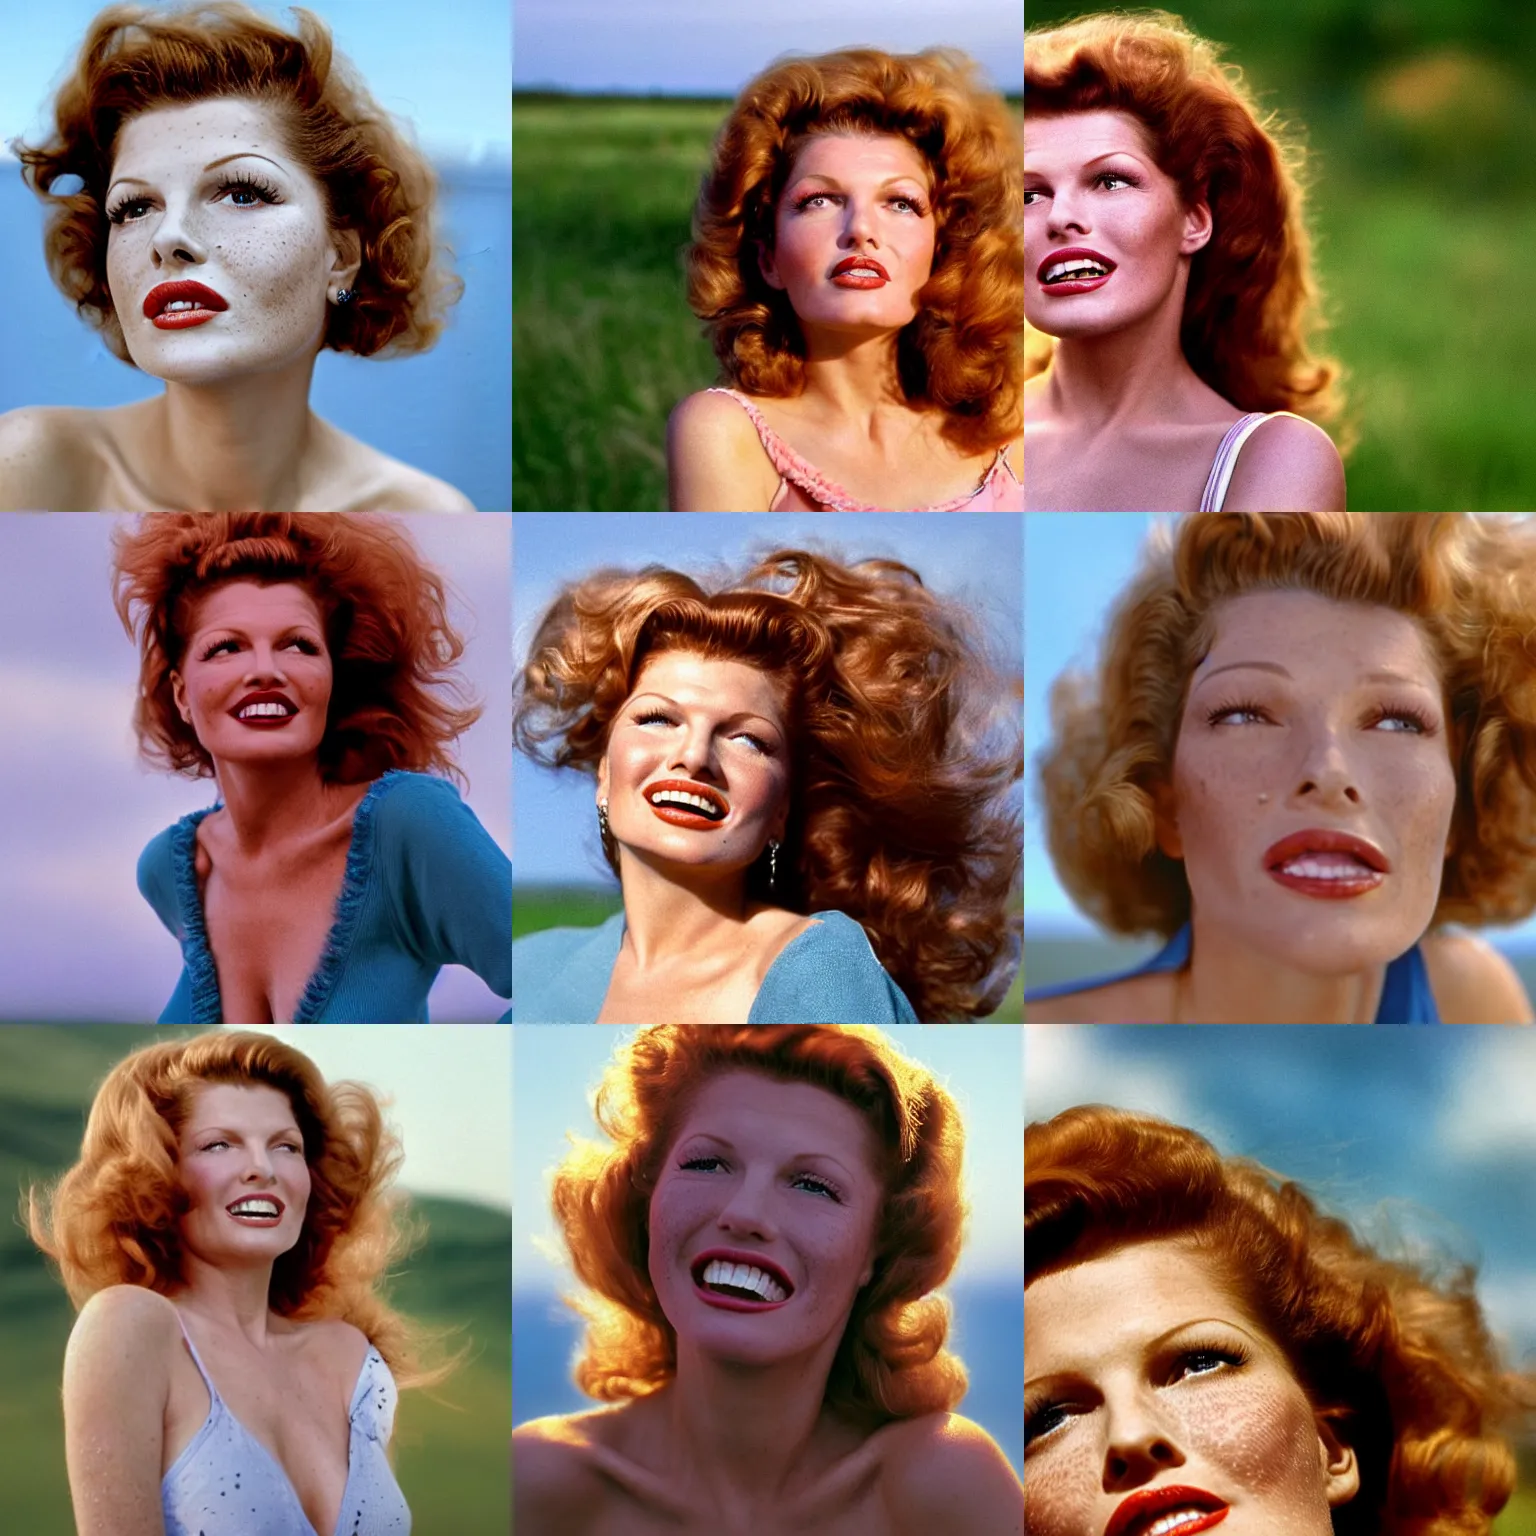 Prompt: natural 8 k close up shot of rita hayworth with freckles, natural skin and beauty spots in a 2 0 0 5 romantic comedy by sam mendes. she stands and looks on the horizon with winds moving her hair. fuzzy blue sky in the background. no make - up, no lipstick, small details, wrinkles, natural lighting, 8 5 mm lenses, sharp focus